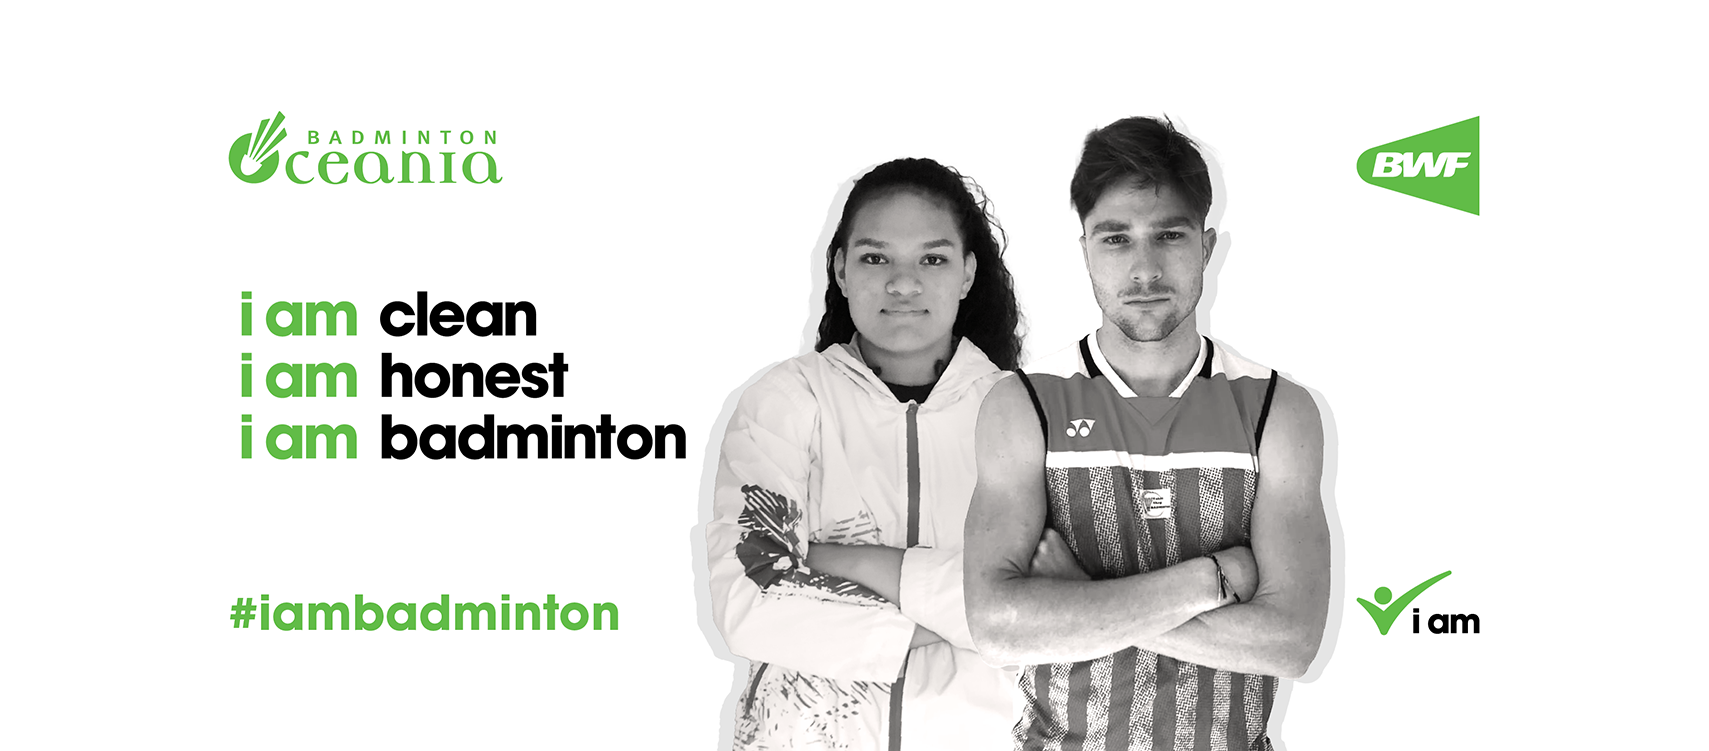 Pacific Games champions Rossi and Matauli join "i am badminton" campaign